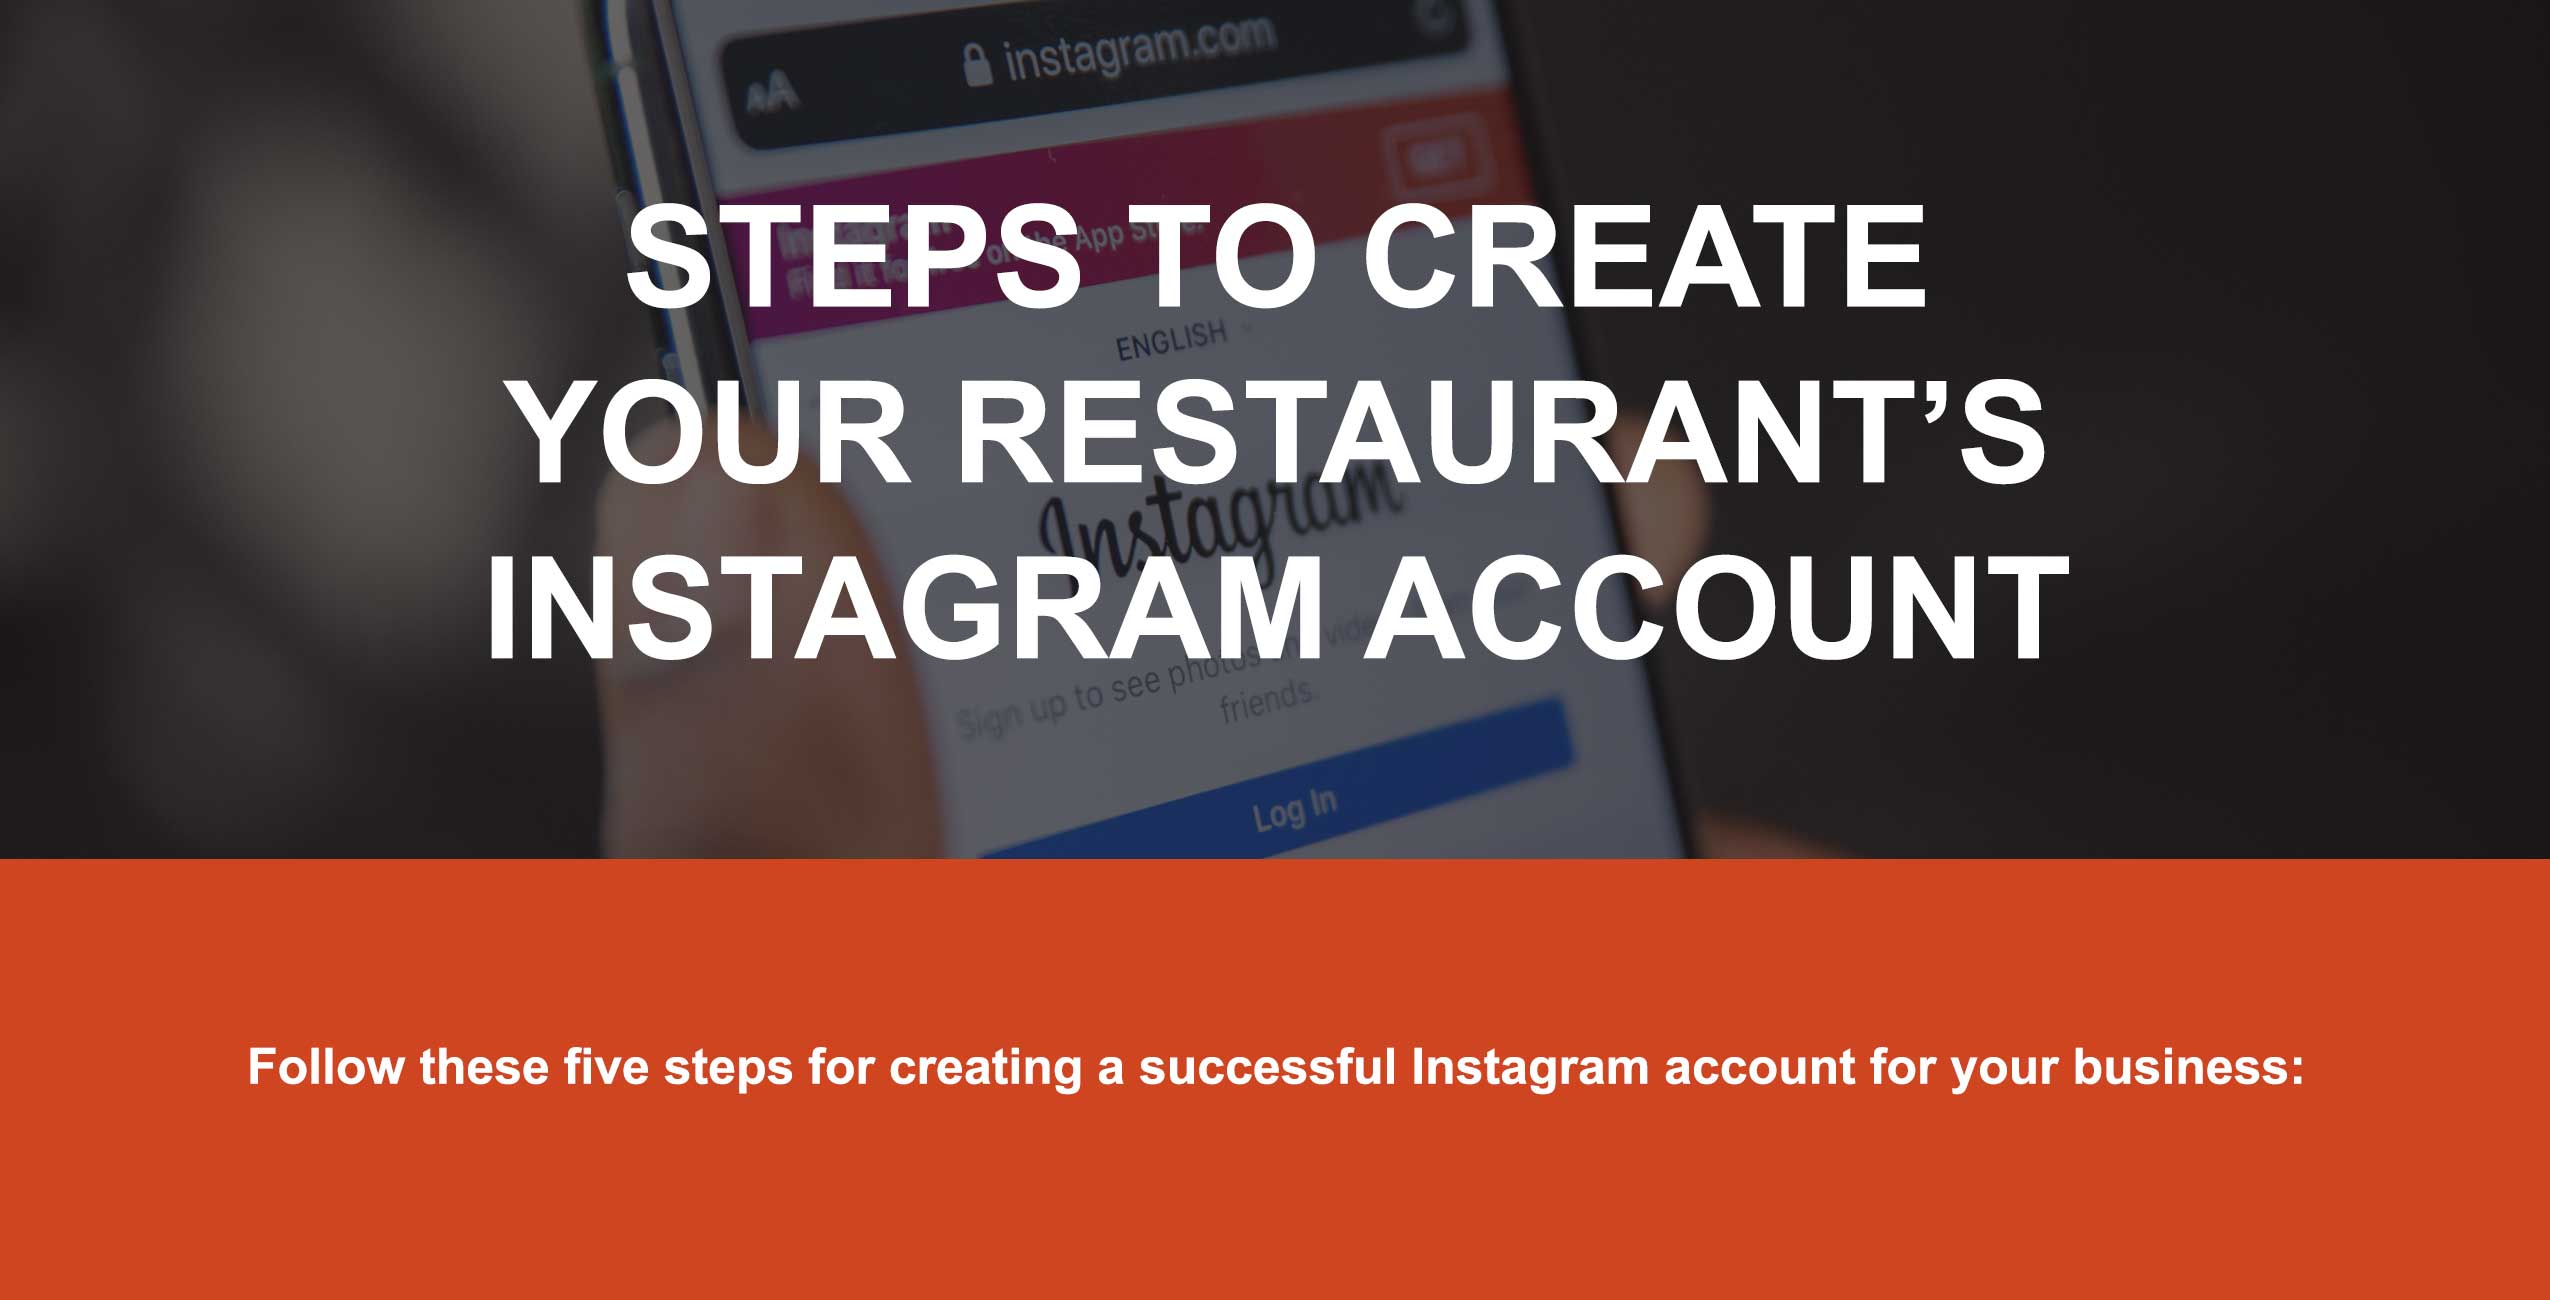 Steps to create your restaurant's Instagram account.